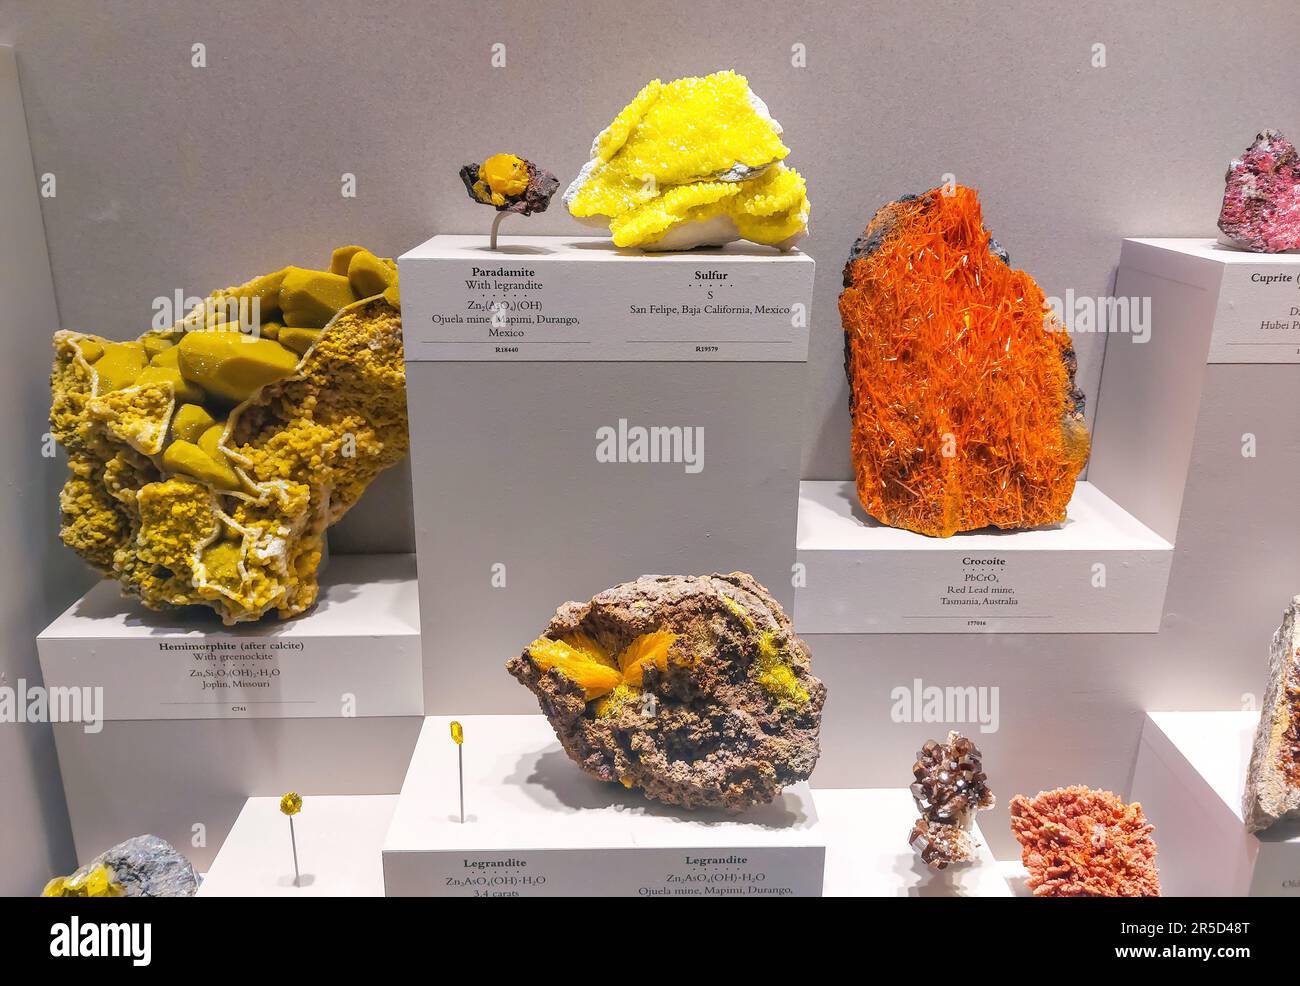 Crystals in the National Museum of Natural History in Washington DC, USA. Stock Photo